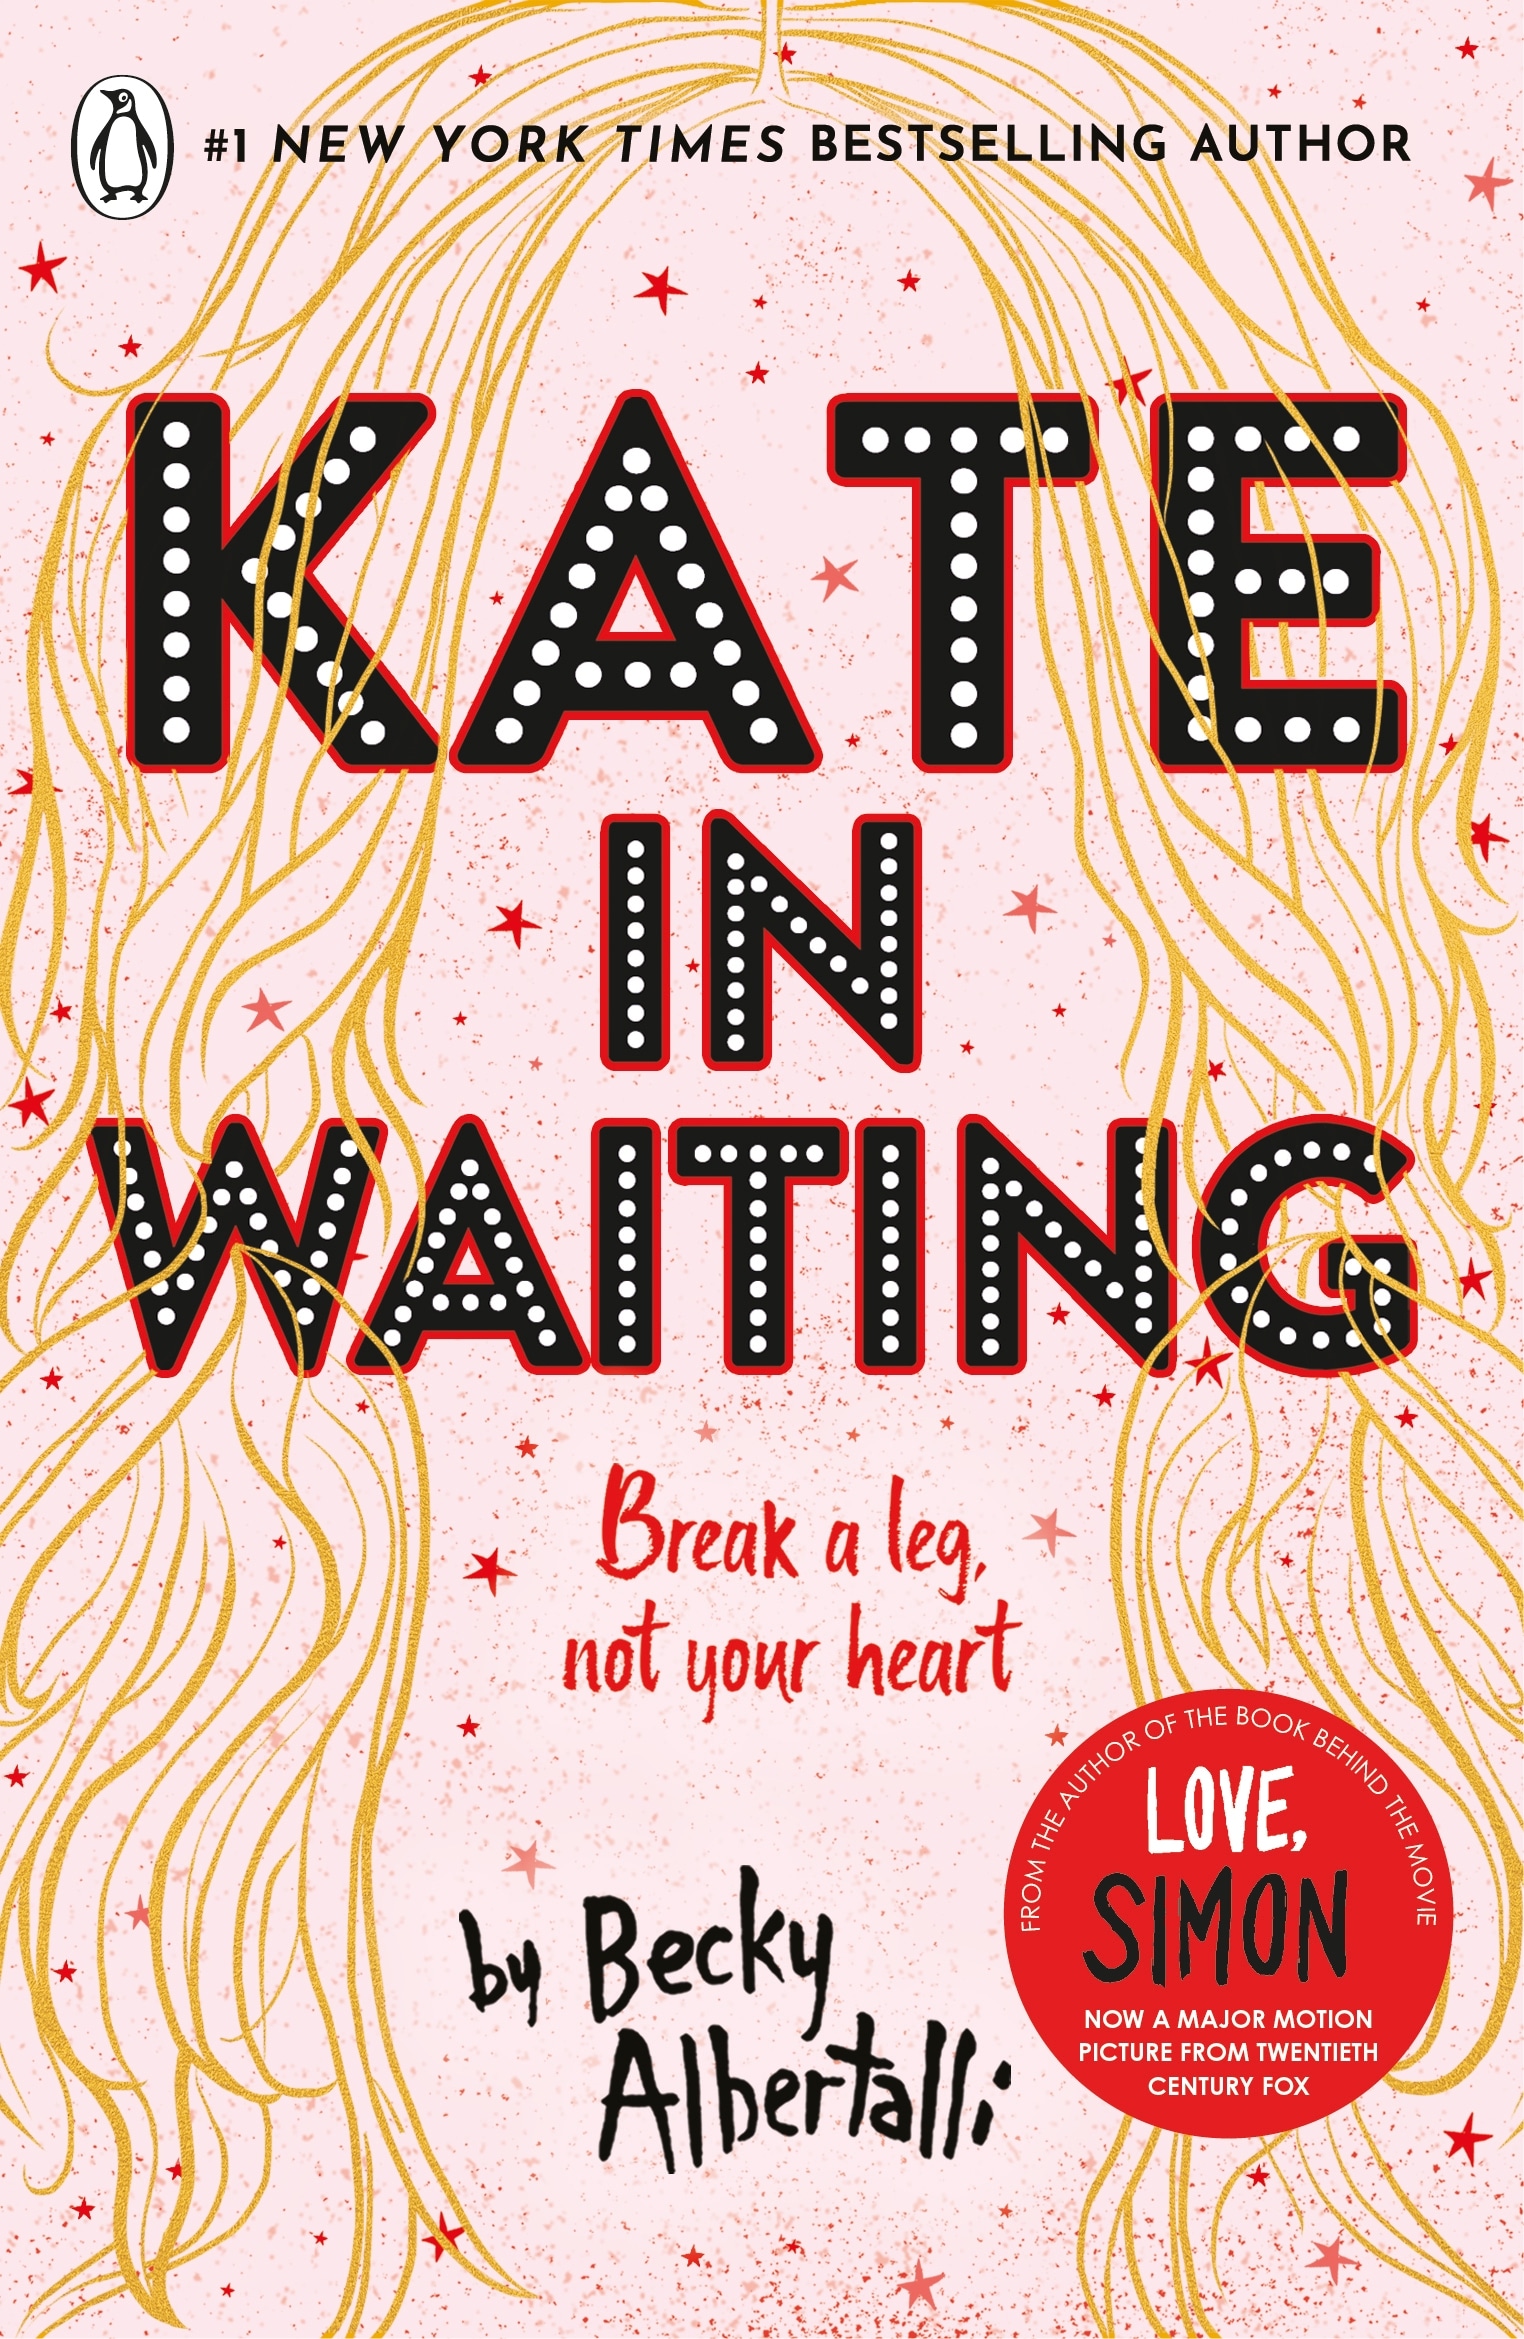 Book “Kate in Waiting” by Becky Albertalli — April 22, 2021